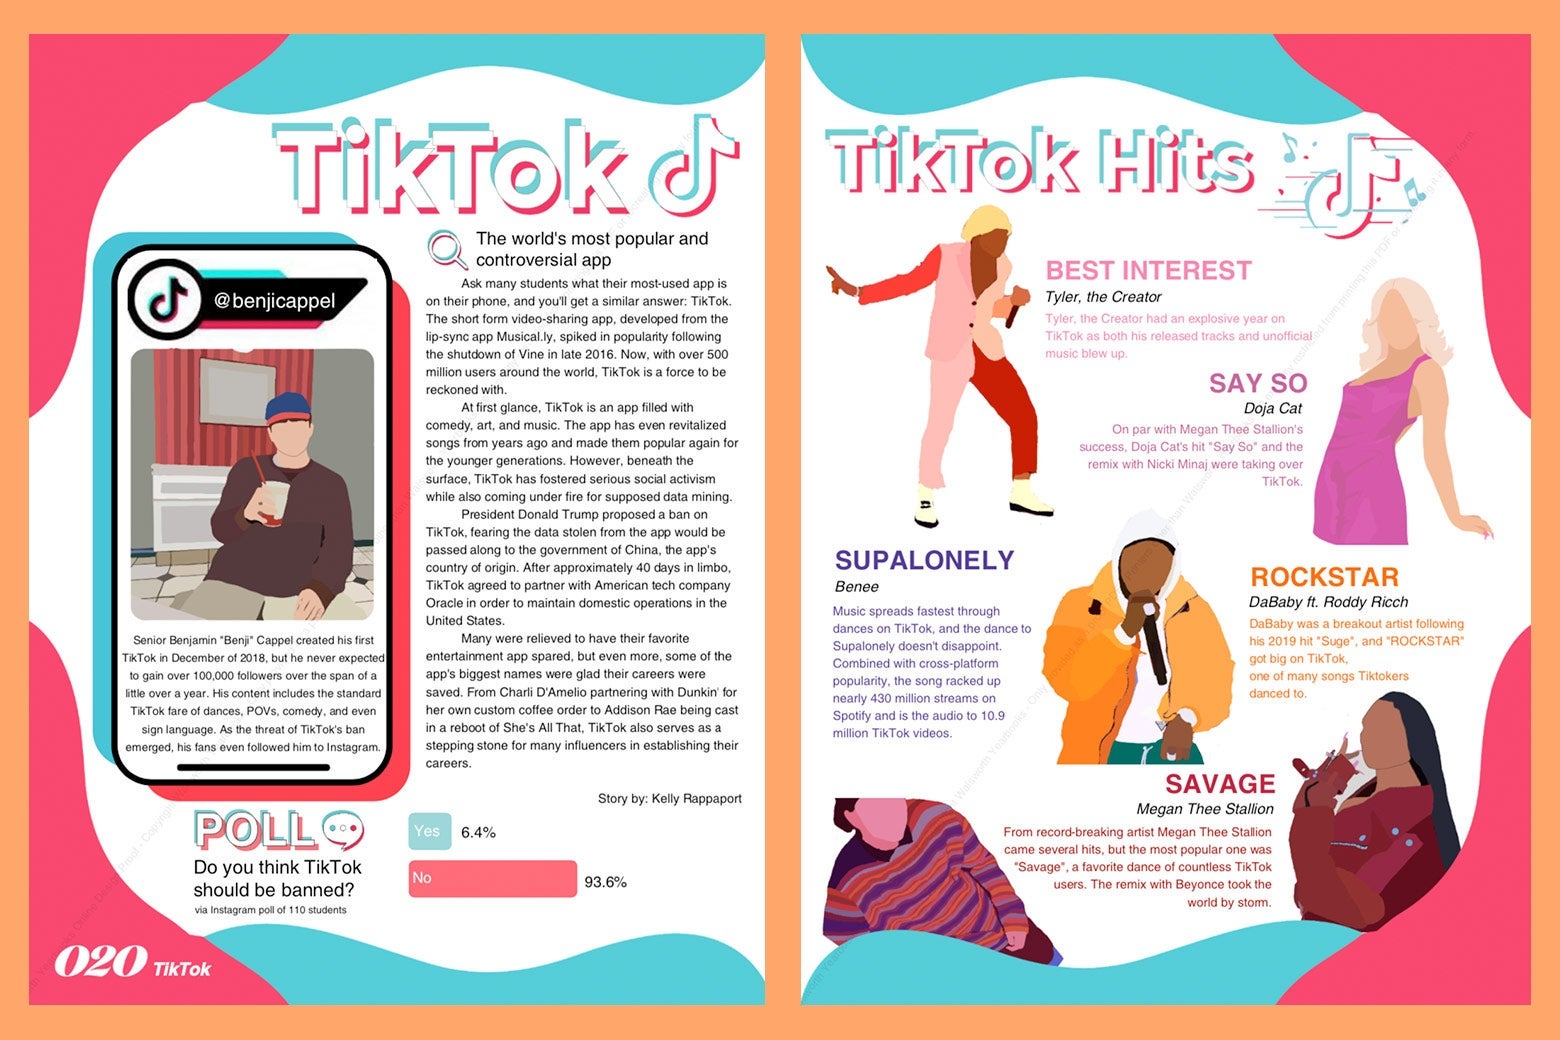 A TikTok spread in the yearbook.